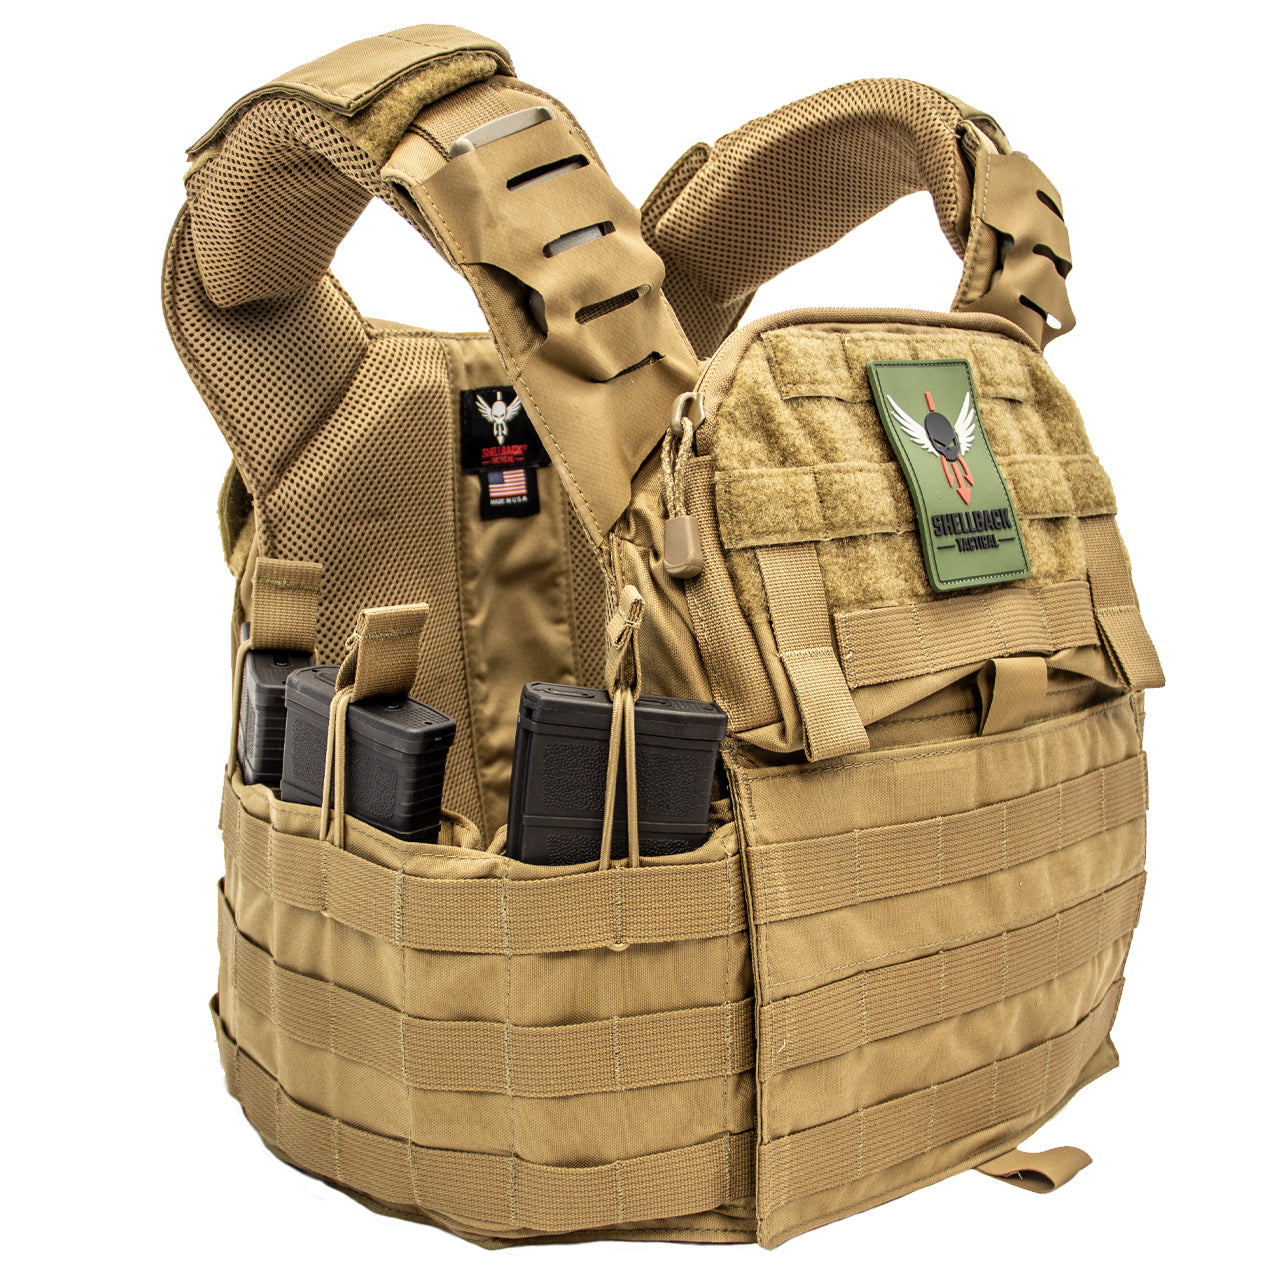 The Shellback Tactical Banshee Elite 2.0 Plate Carrier from Shellback Tactical.